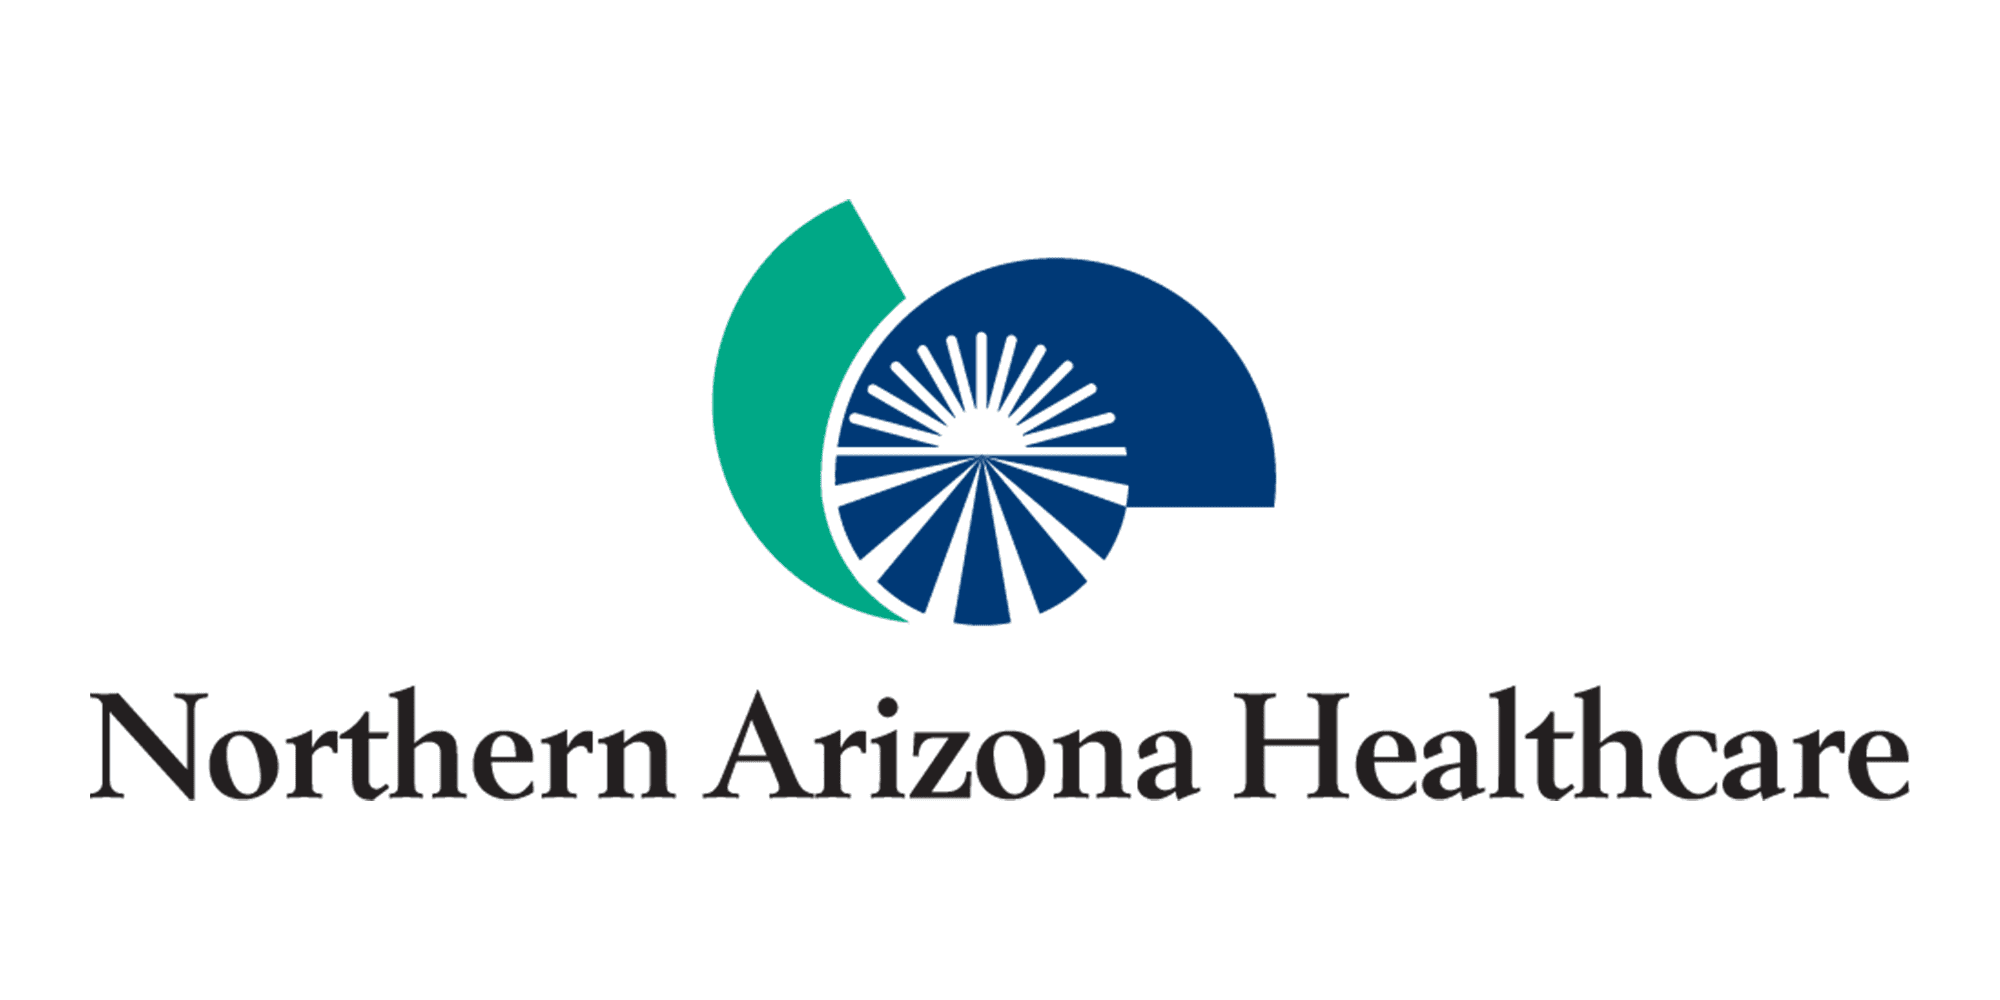 Virtual interviews now being scheduled for RNs, CRNAs and Imaging Positions in Flagstaff and Verde Valley